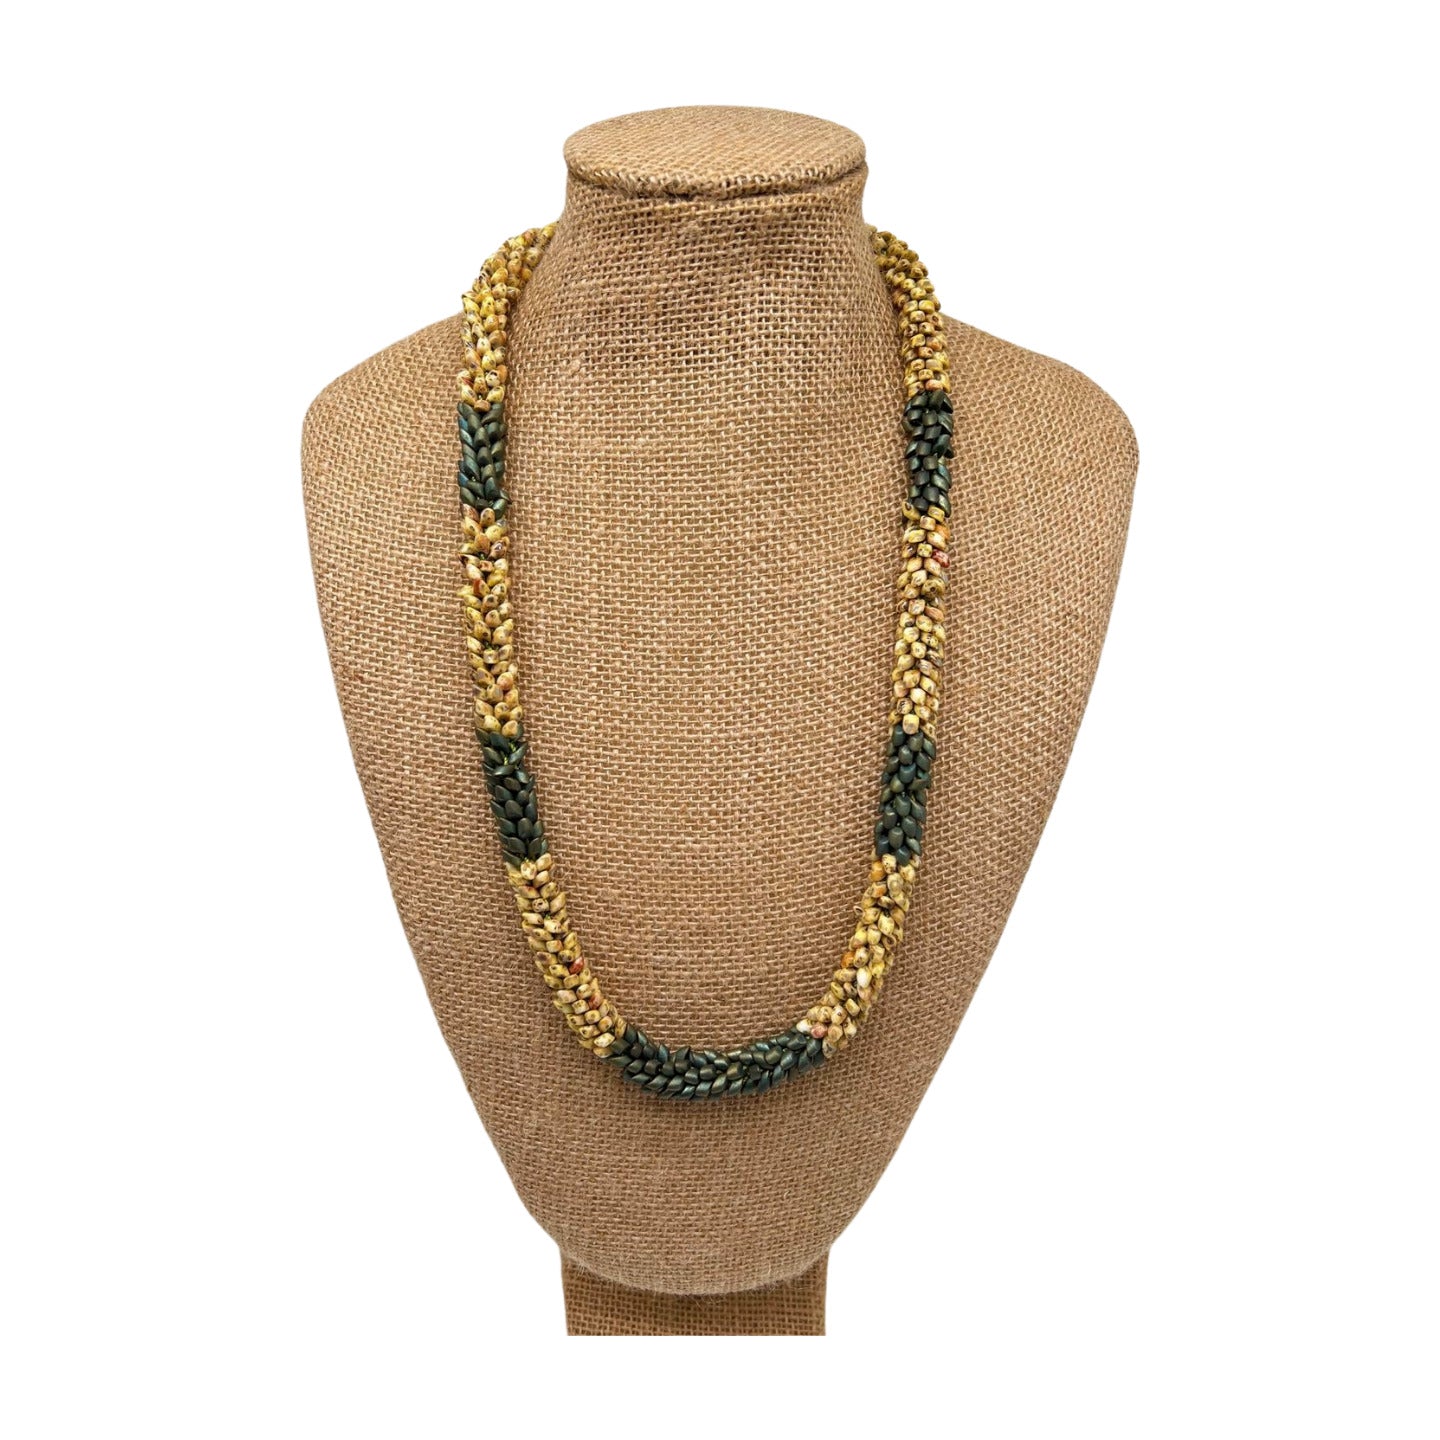 Pop-Up Mākeke - Akalei Designs - Picasso Yellow & Metallic Green Dragon Scales Necklace  - 27in - Front View